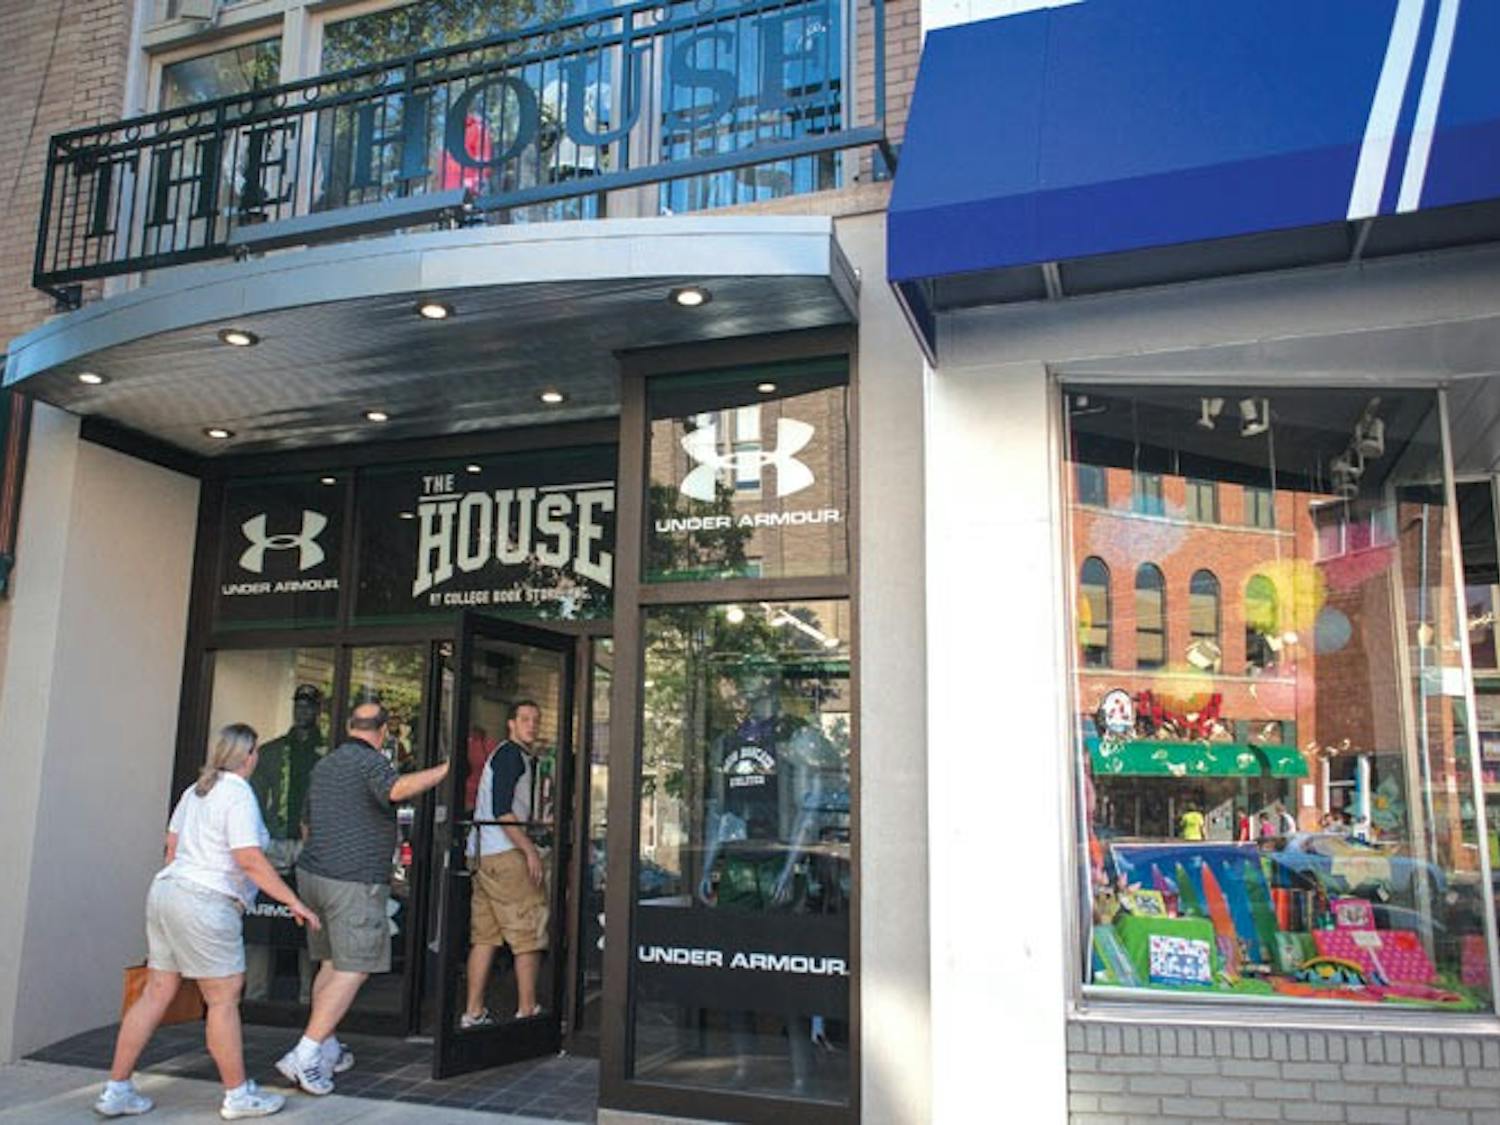 The House gives home to Under Armour brand  